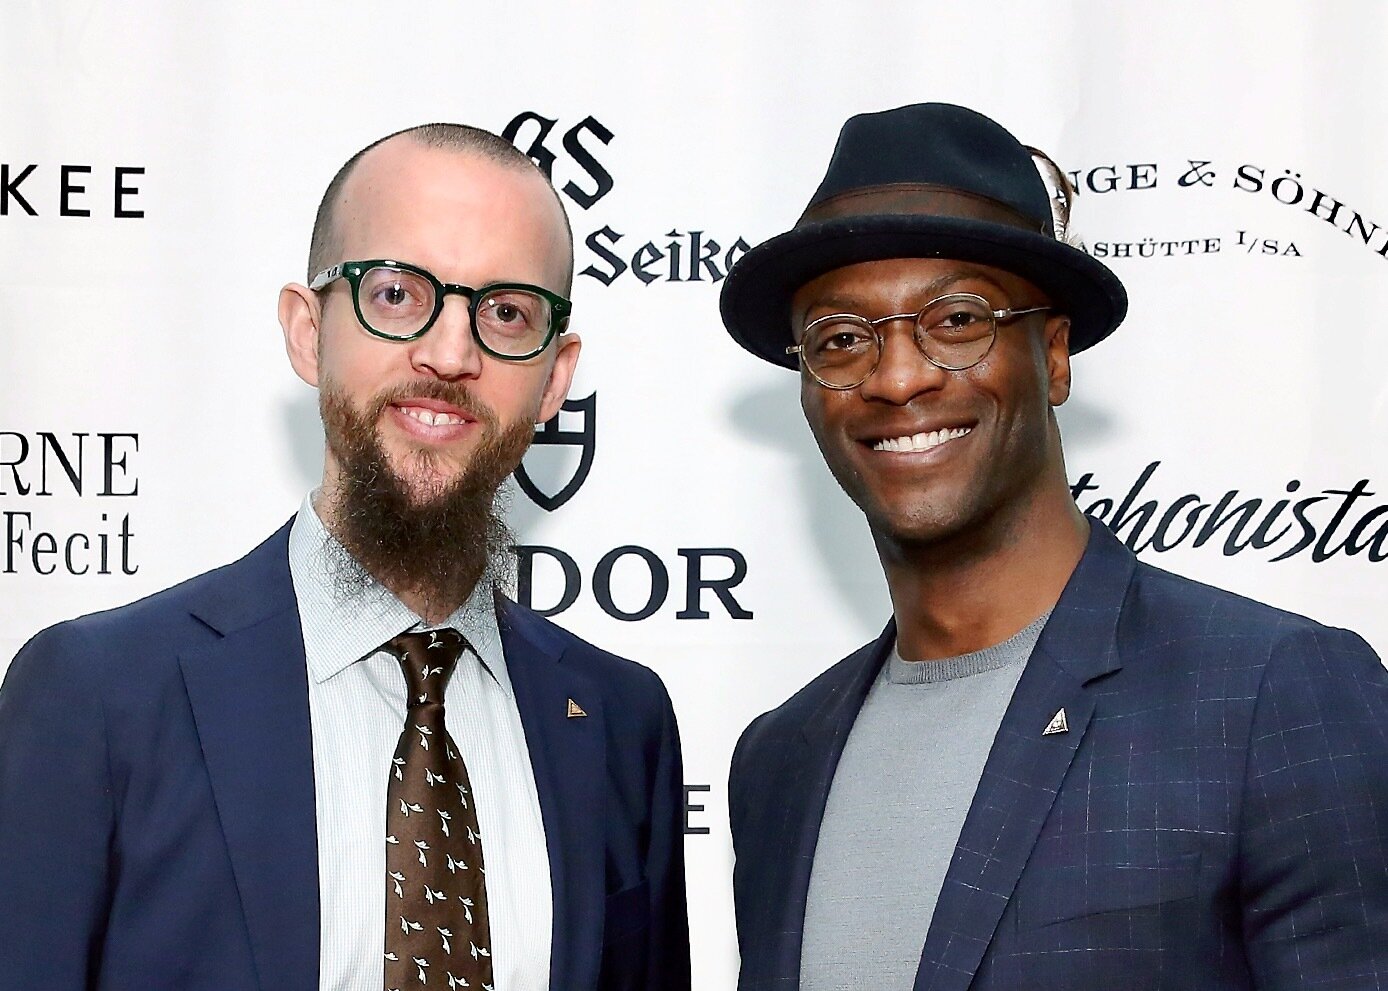 Nicholas Manousos (left) with actor Aldis Hodge (right) appointed Trustee of the Horological Society of New York (Photo credit: HSNY)